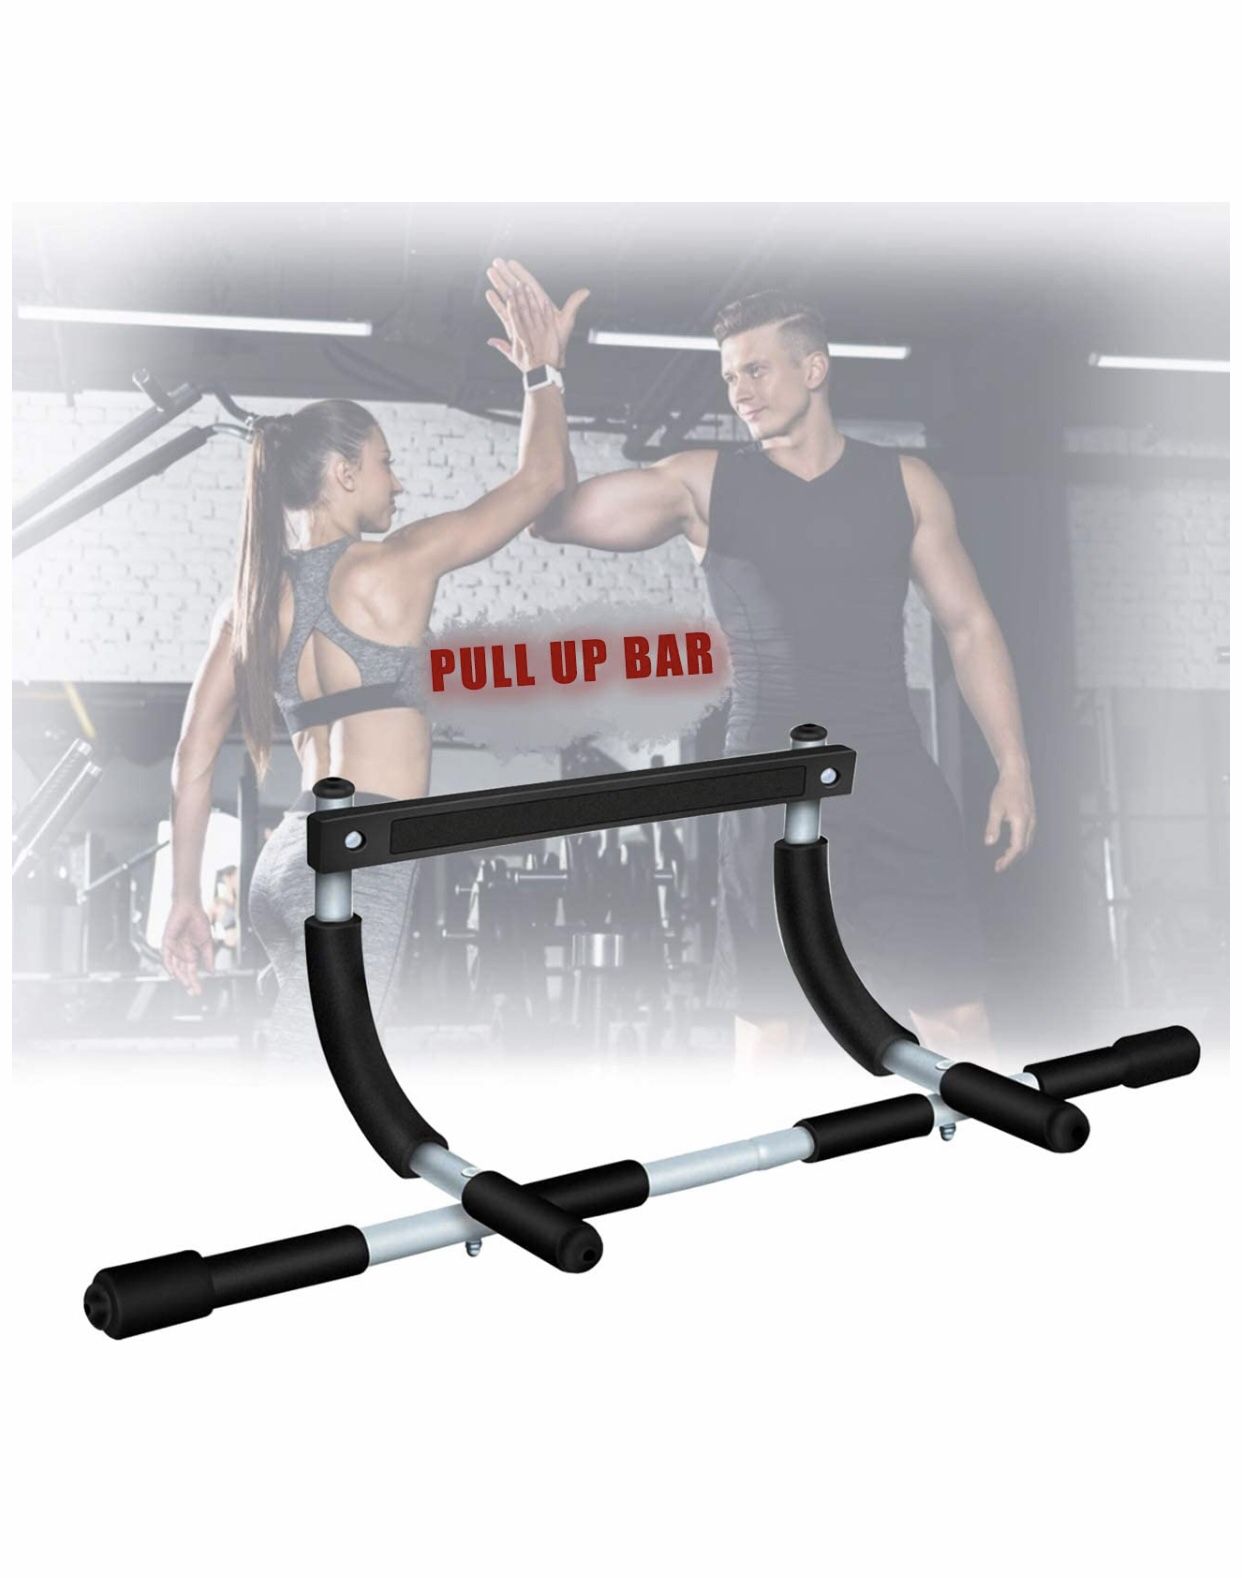 New Perfect Multifunctional Portable Indoor Fitness Chin Up Bar,Home Gym Exercise Equipment Training Upper Body Workout Bar,Dips Situps Pushups Bar